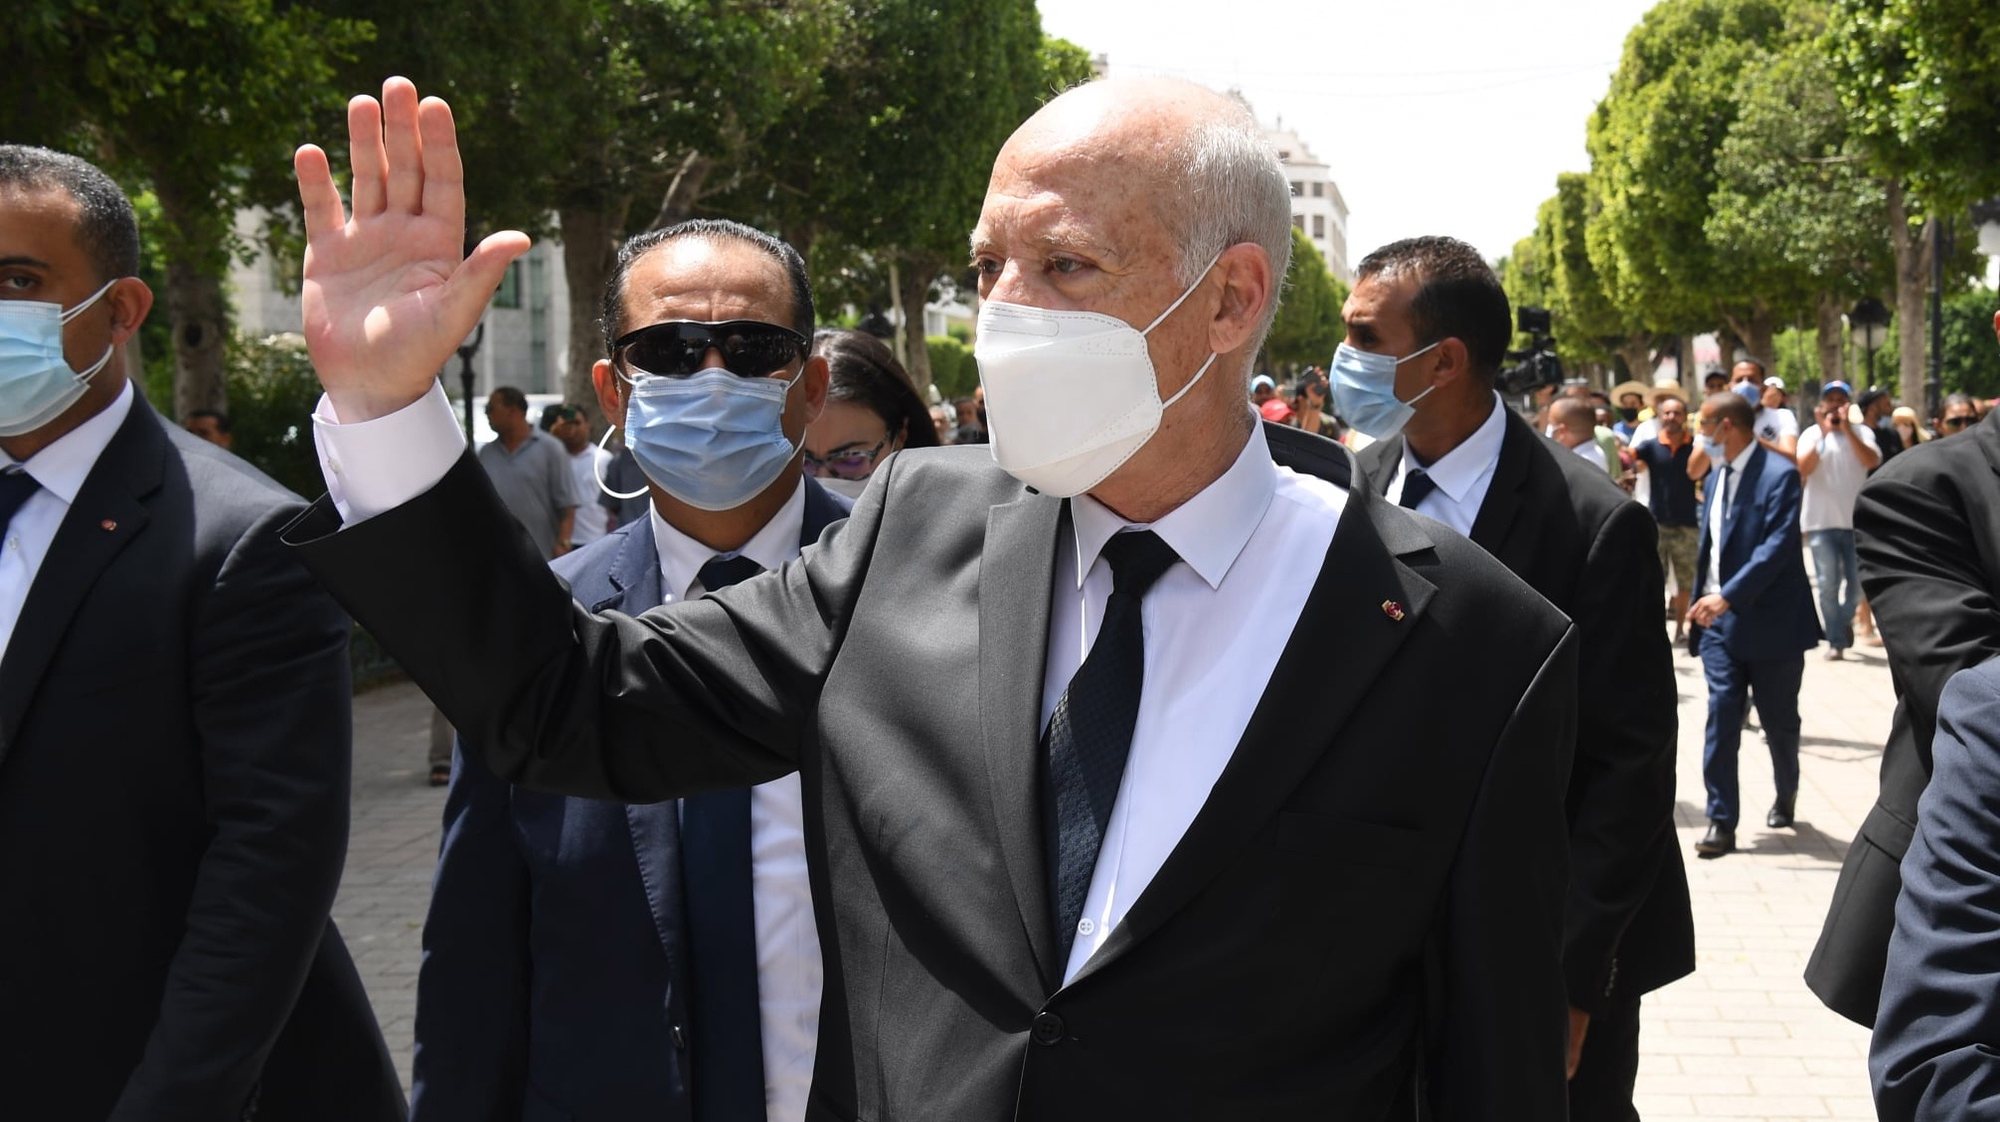 epa09386128 A handout photo made available by the Tunisian Presidency shows Tunisian President Kais Saied gesturing among supports as he walks protected by security guards in Habib Bourguiba Avenue, Tunis, Tunisia, 01 August 2021. Two Members of the Parliament were reportedly arrested on 01 August brining to three the number of MPs detained since Saied sacked prime minister Mechichi and suspended the parliament on 25 July. Saied said he acted within the constitution as US Secretary of State Antony Blinken called for the return &#039;to the democratic path&#039; in the country.  EPA/PRESIDENCY OF TUNISIA HANDOUT  HANDOUT EDITORIAL USE ONLY/NO SALES